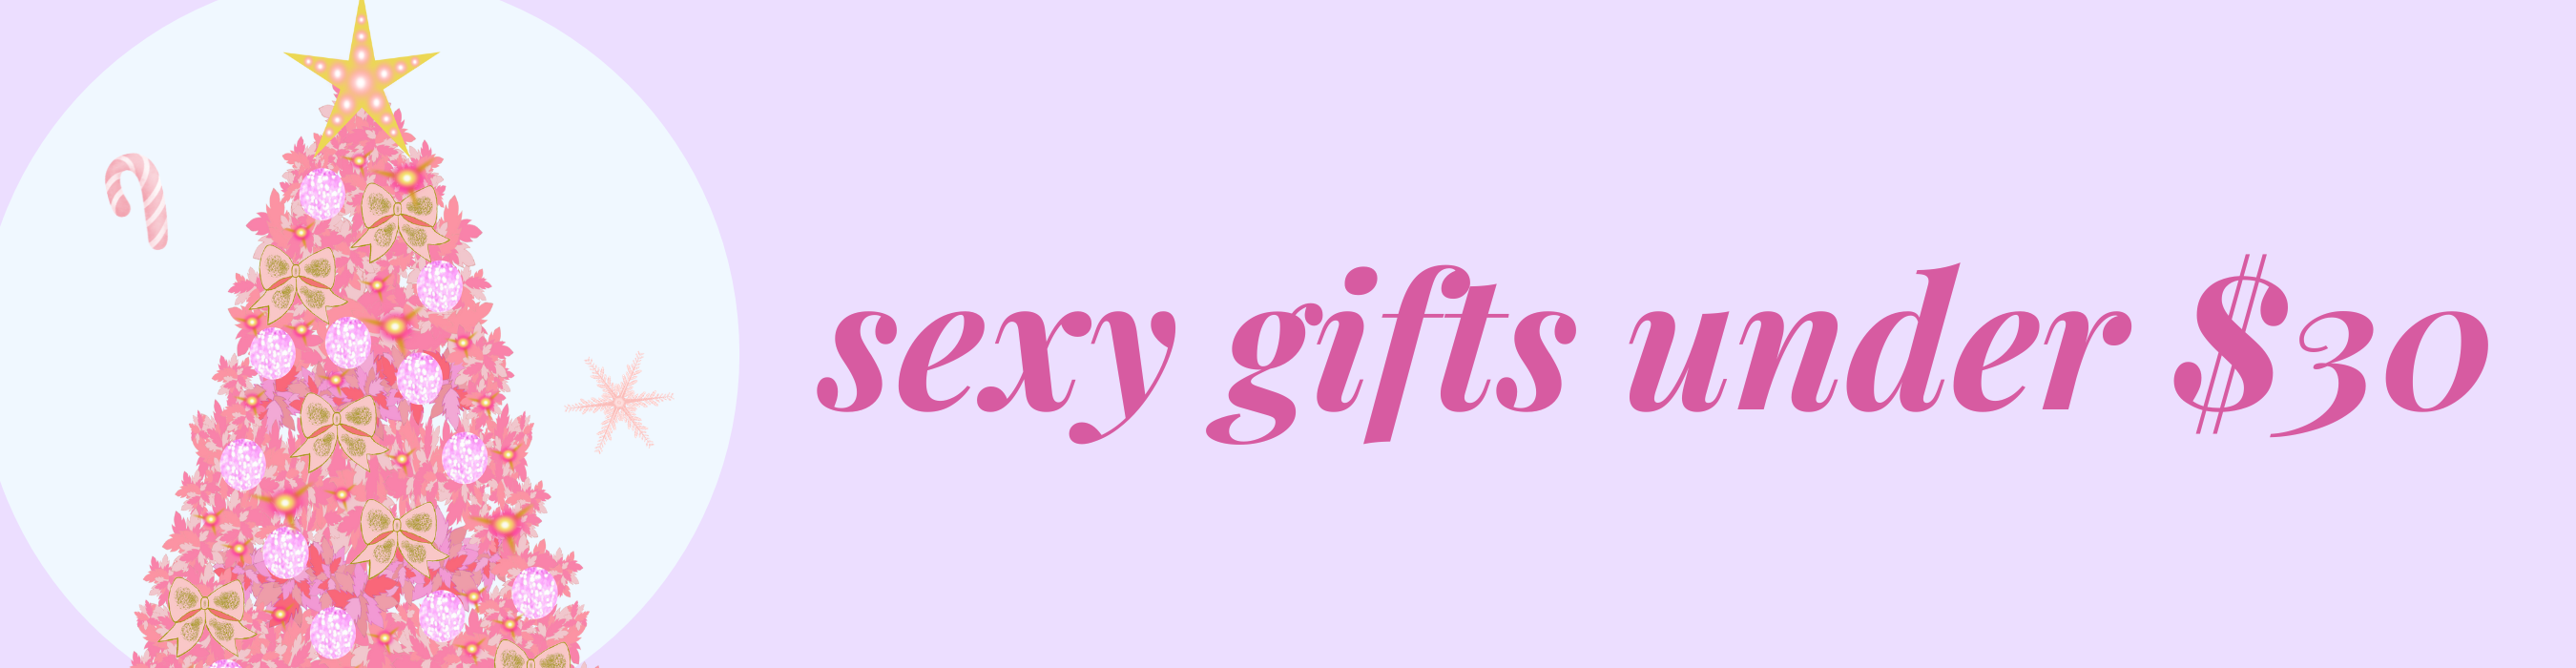 Shop our sexy gifts under $30